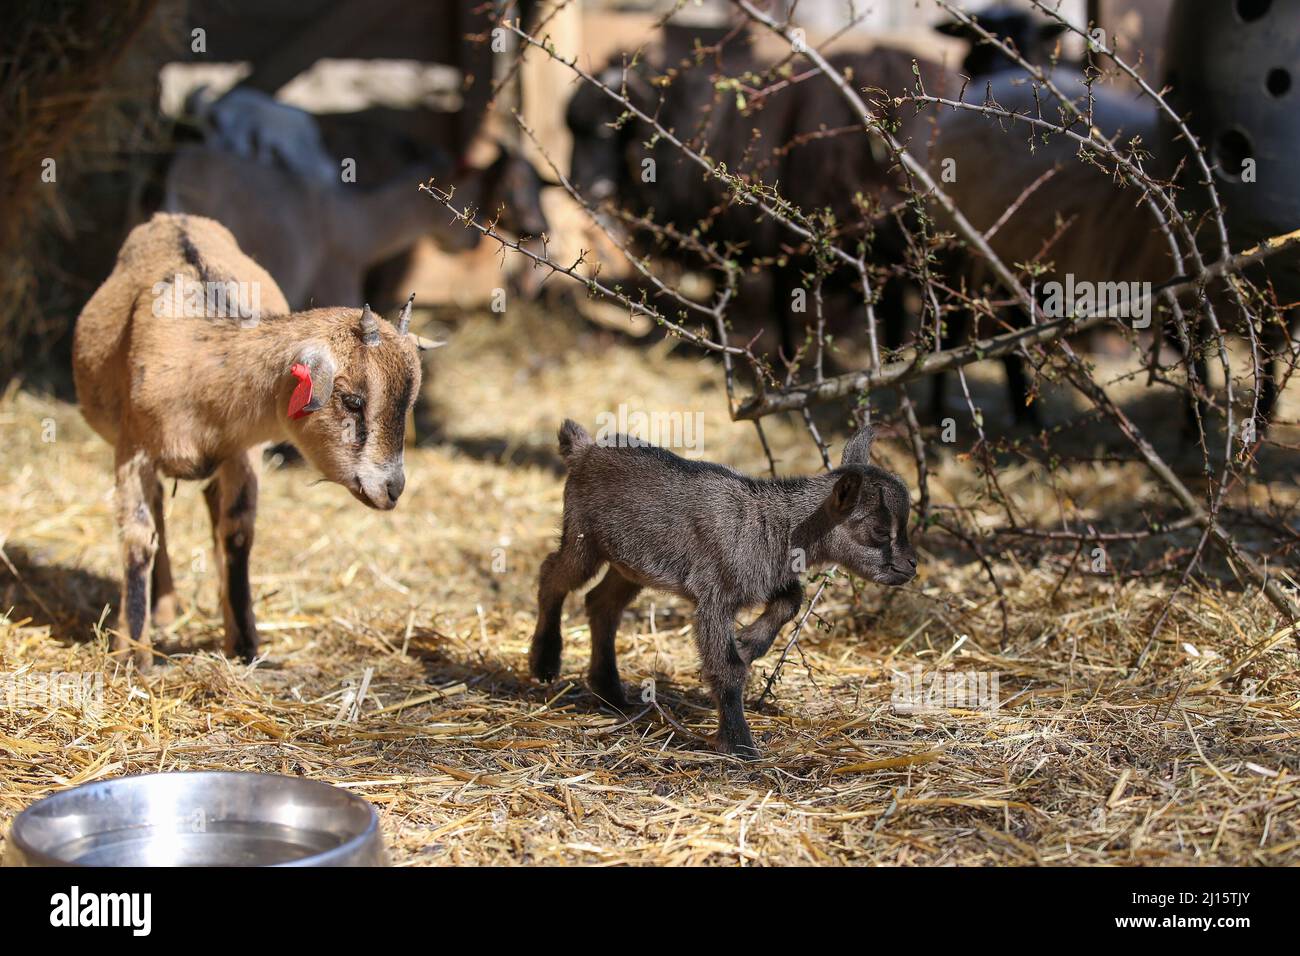 (220323) -- ZAGREB, March 23, 2022 (Xinhua) -- A baby dwarf goat (R) is pictured in the Zagreb Zoo, in Zagreb, Croatia, on March 22, 2022. The baby dwarf goat, called Elena, was born four days ago in the zoo. (Matija Habljak/PIXSELL via Xinhua) Stock Photo